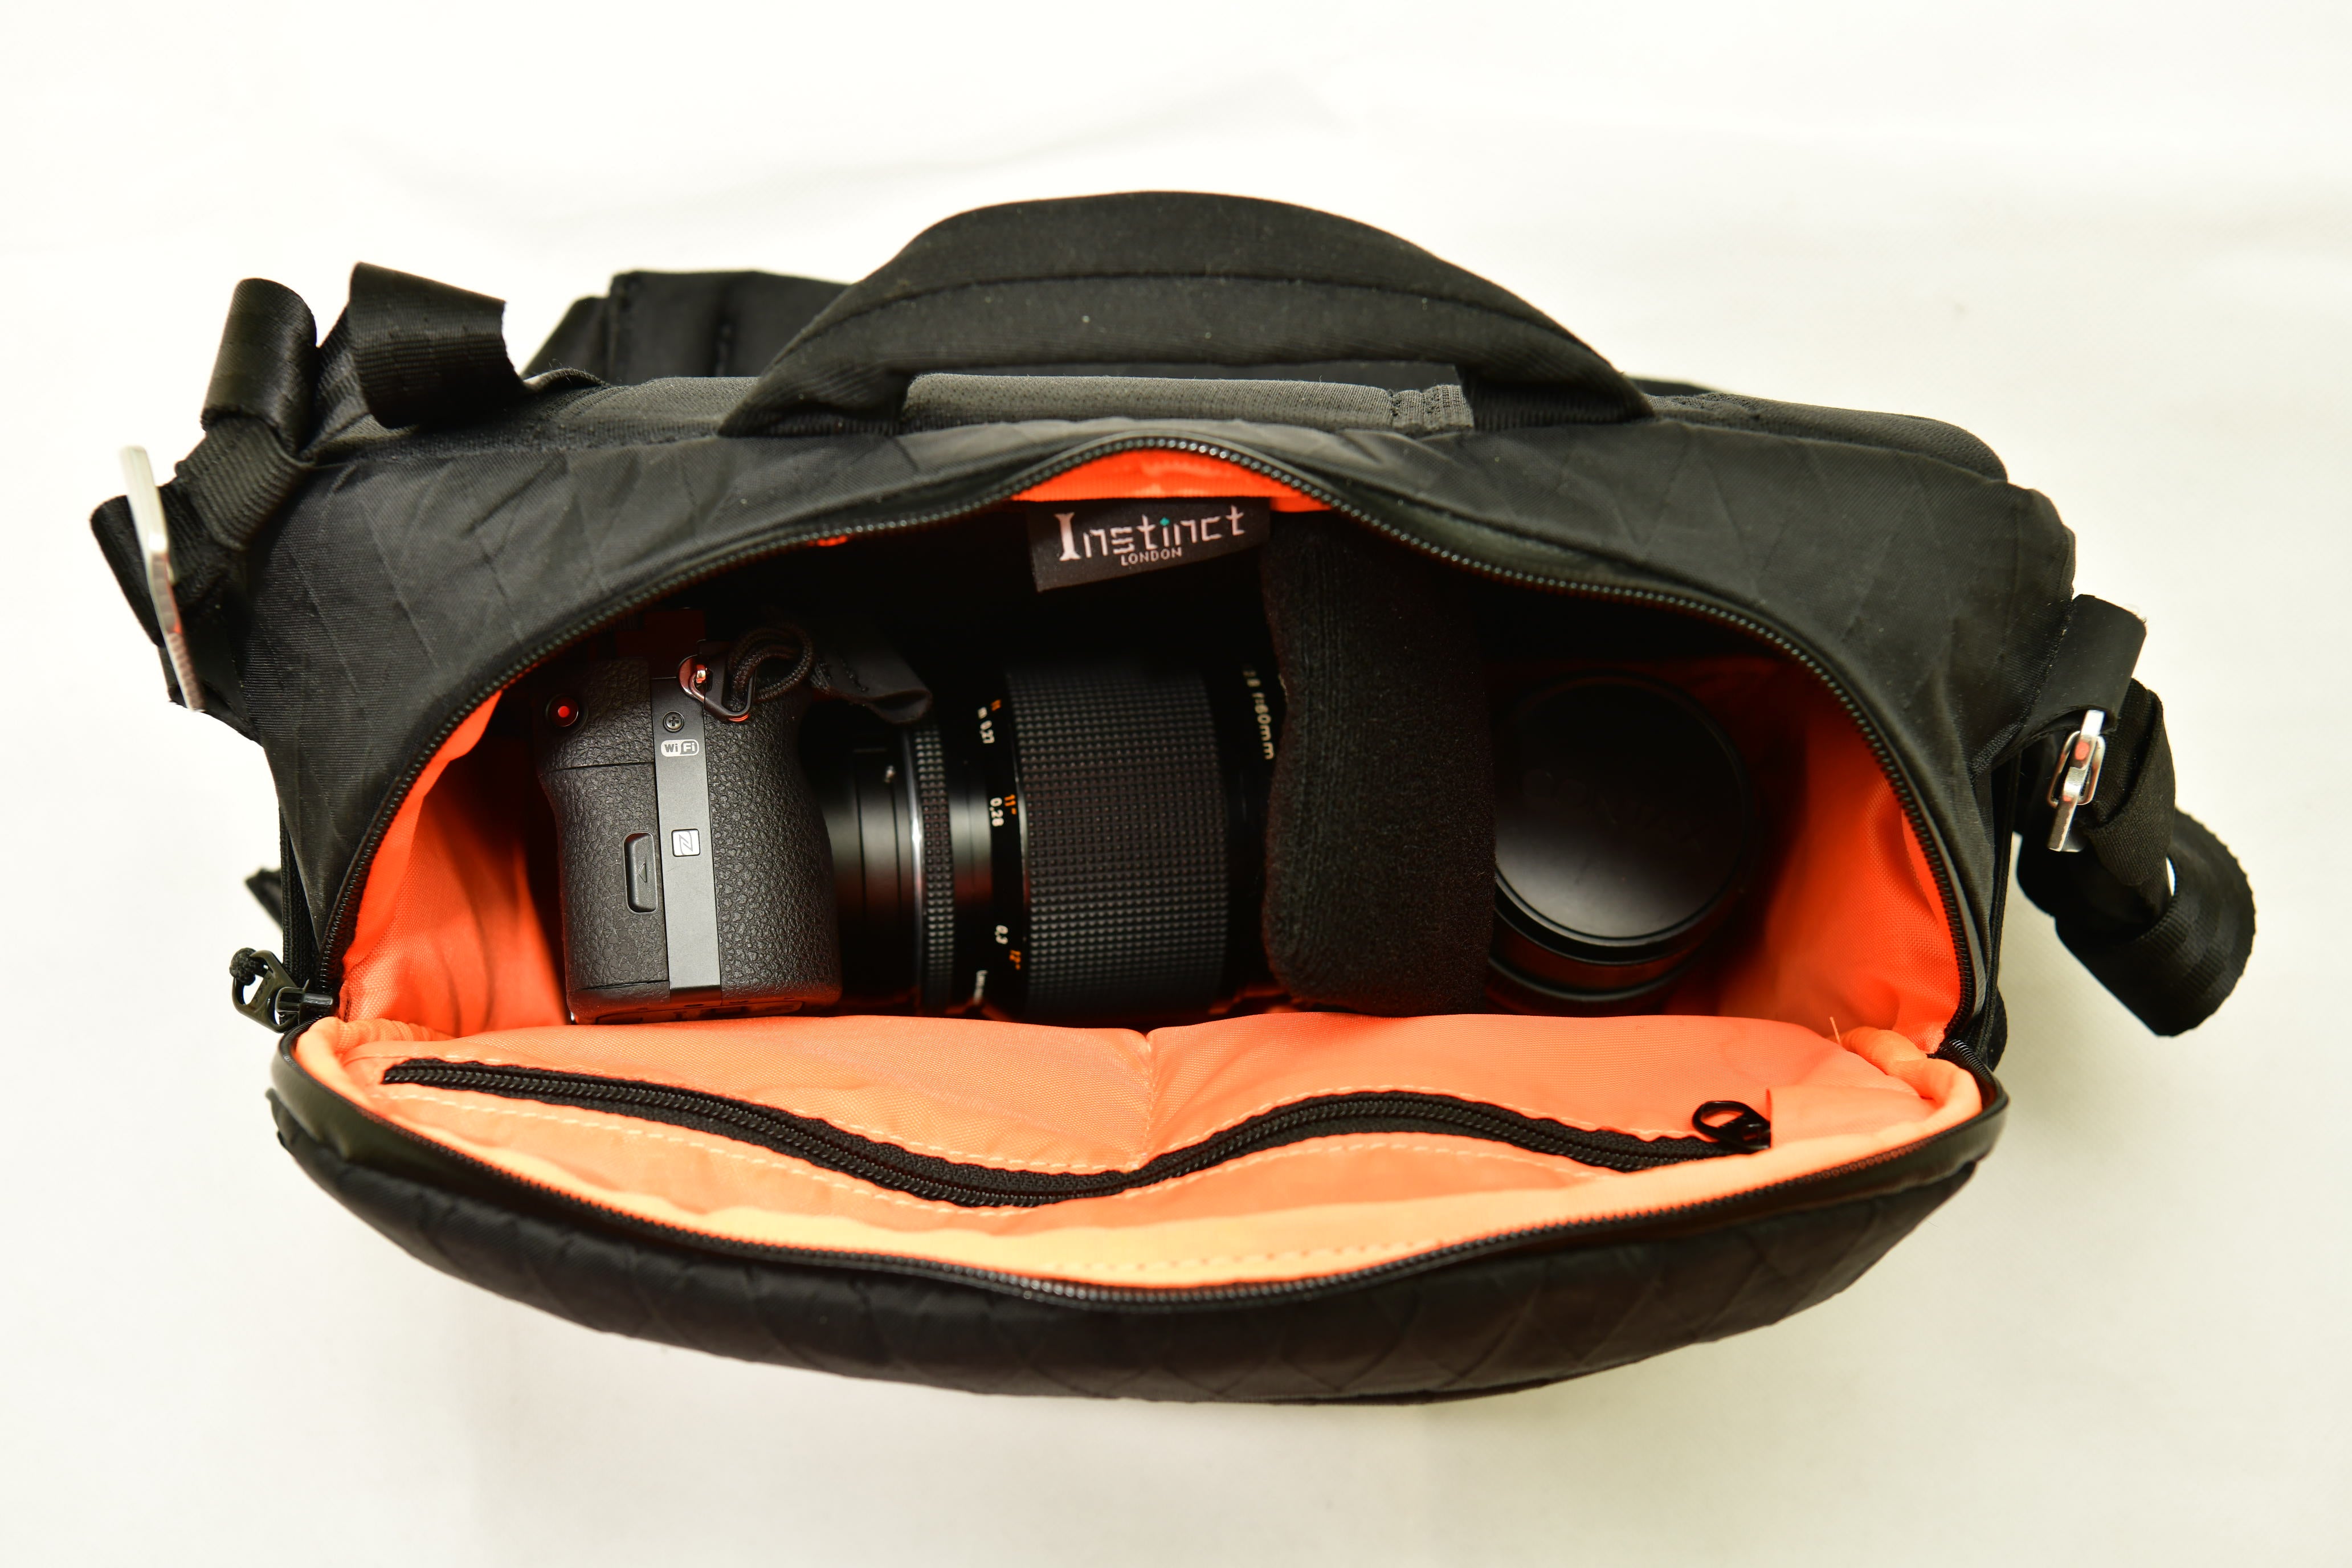 Sony A7 camera with Contax 2.8 60mm lens and Contax 2.8-22 55mm lens inside black x-Pac camera sling bag 7L with orange internal lining